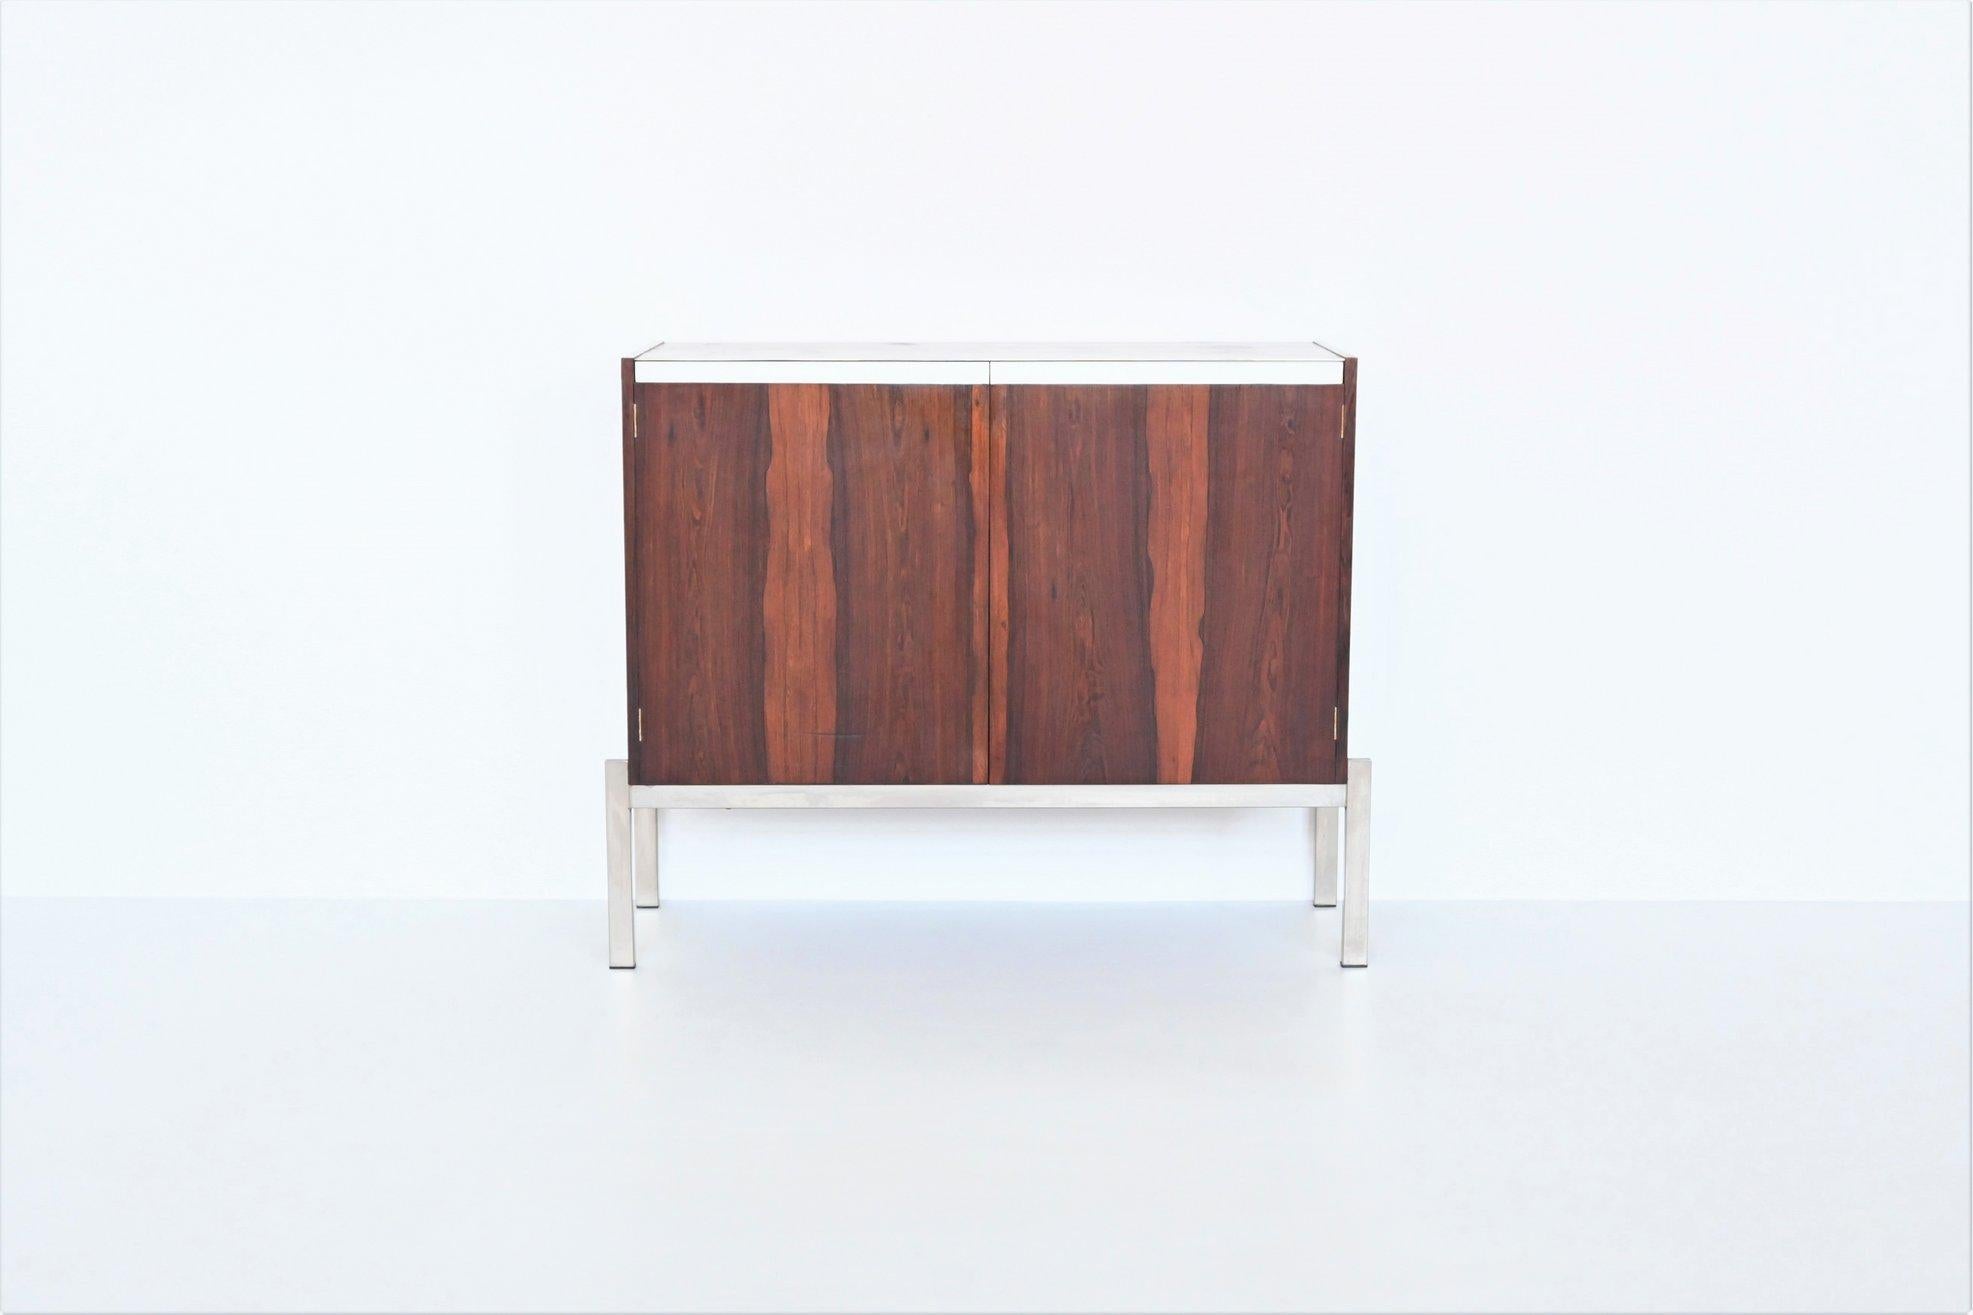 Beautiful shaped modernist small cabinet designed by Kho Liang Ie and Wim Crouwel and manufactured by Fristho Franeker, The Netherlands 1957. This fantastic symmetric cabinet is executed in nicely grained rosewood supported by a chrome plated metal